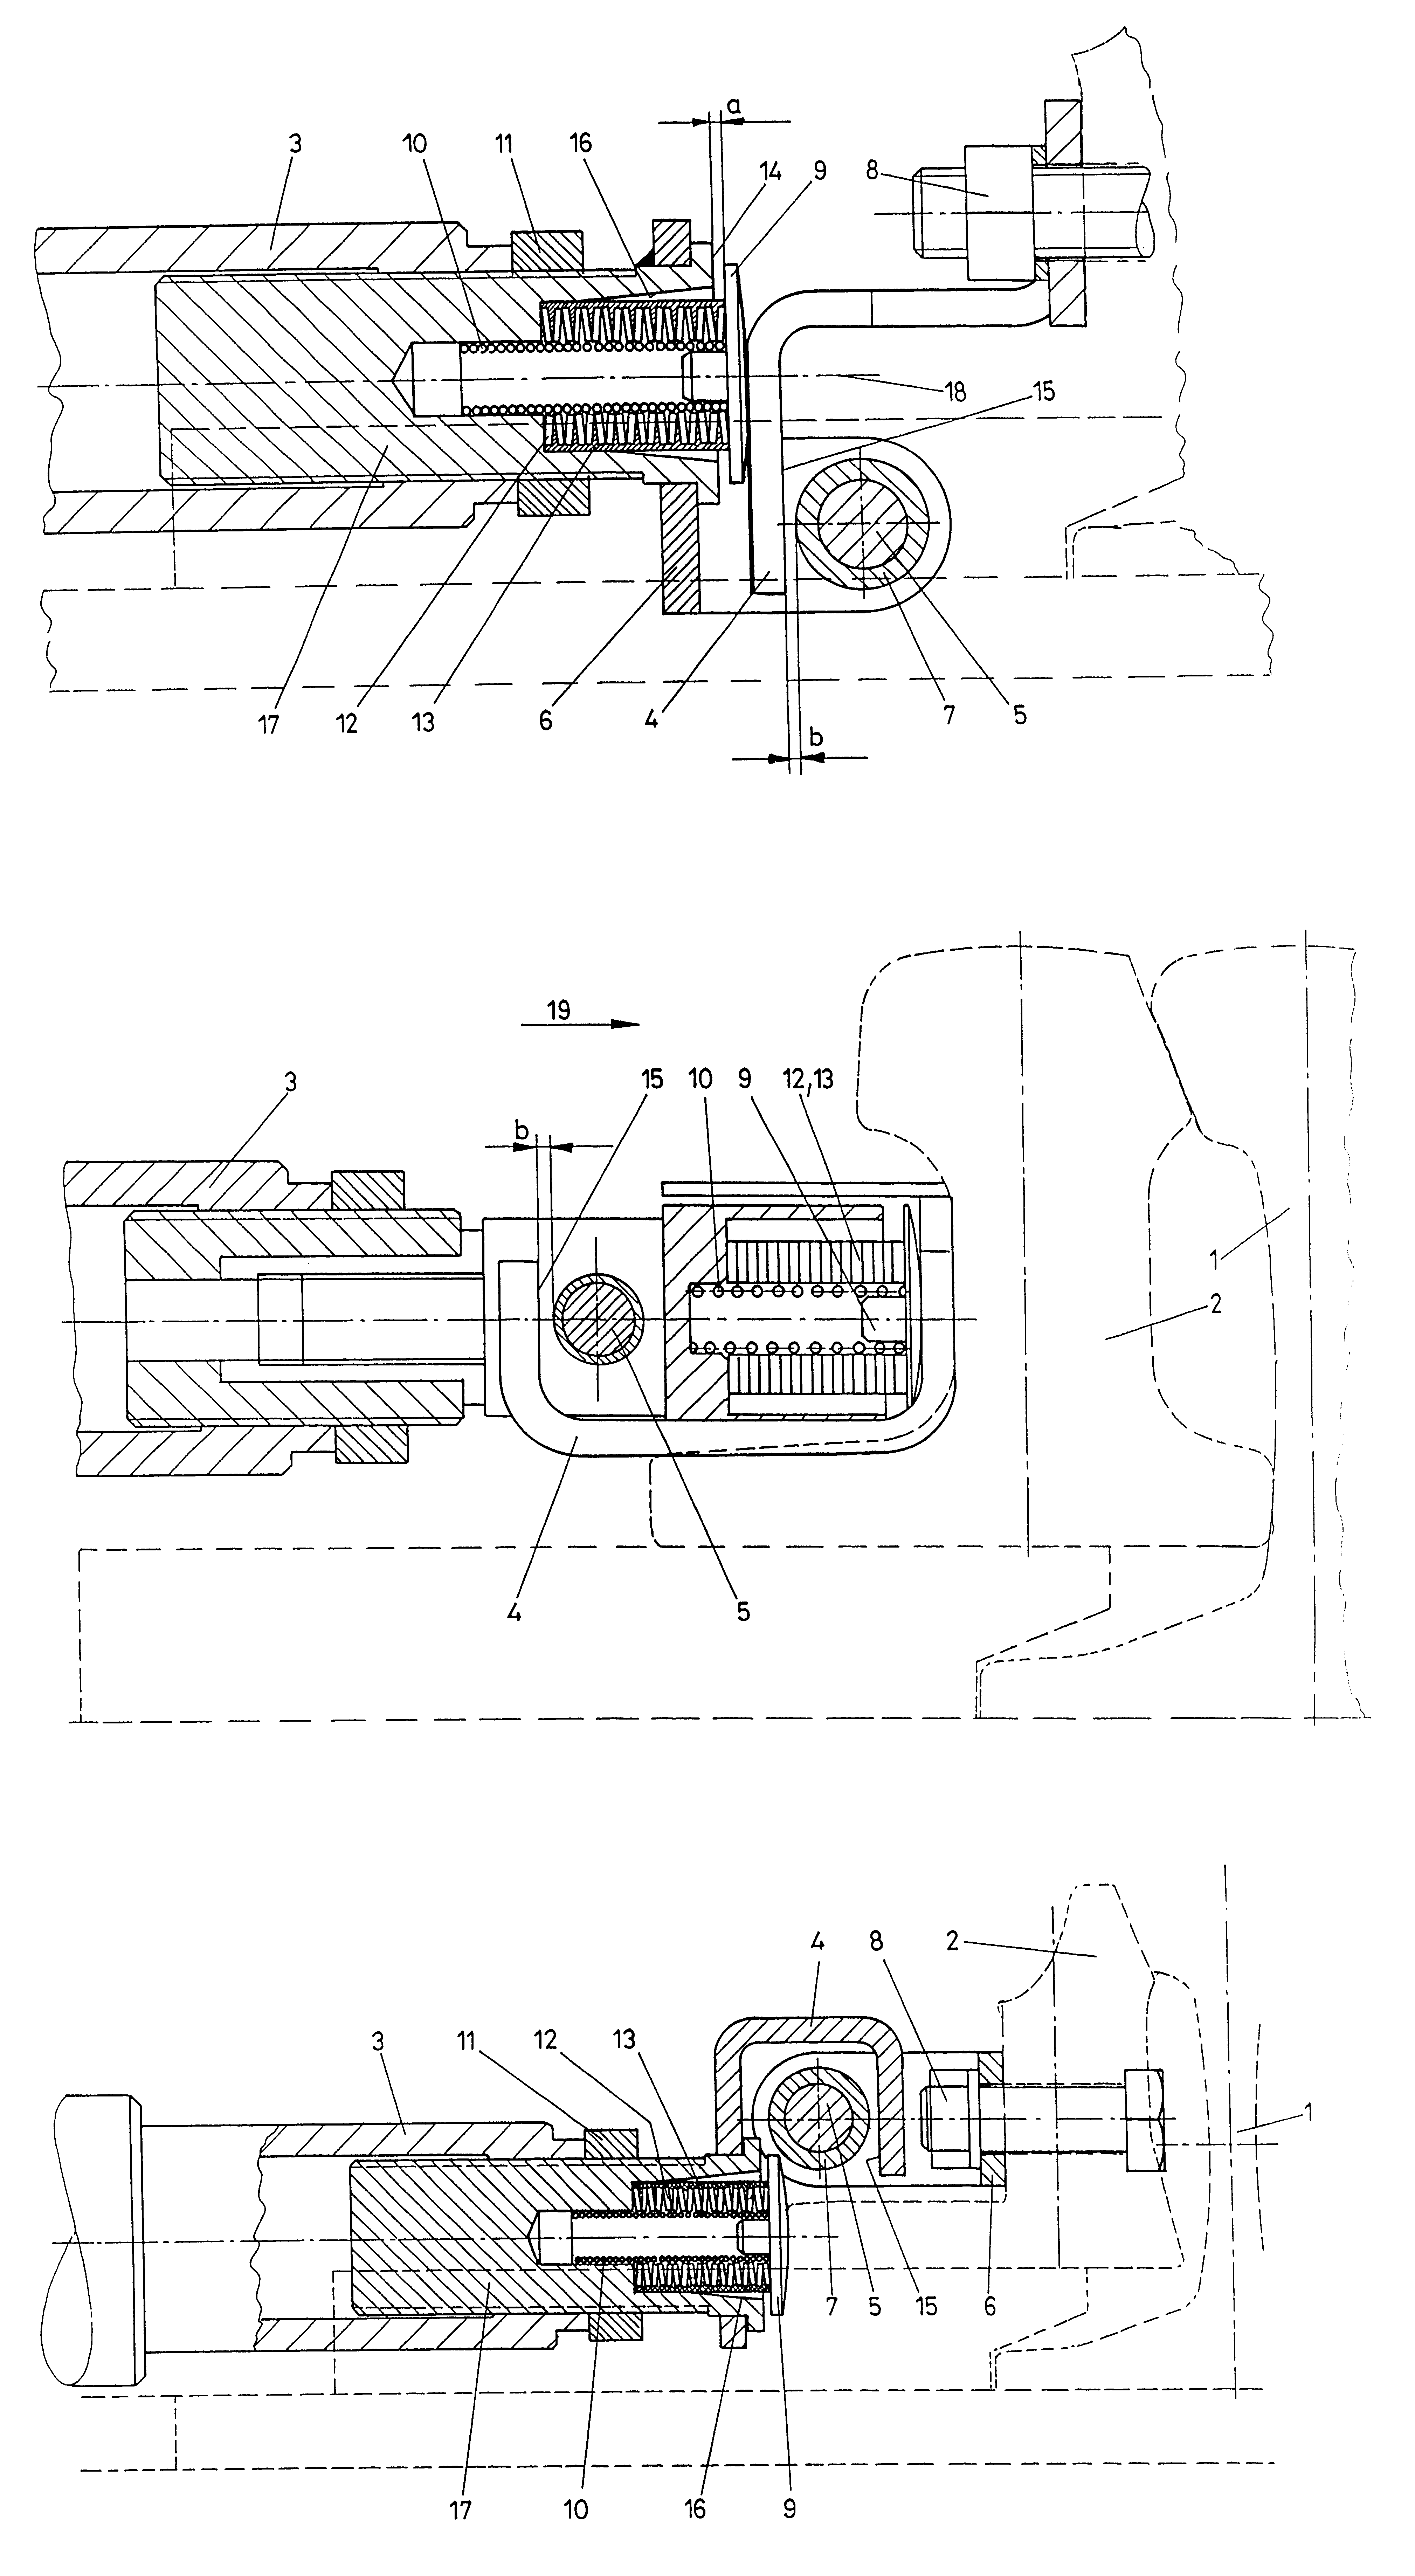 Coupling device for a point actuator and/or lock